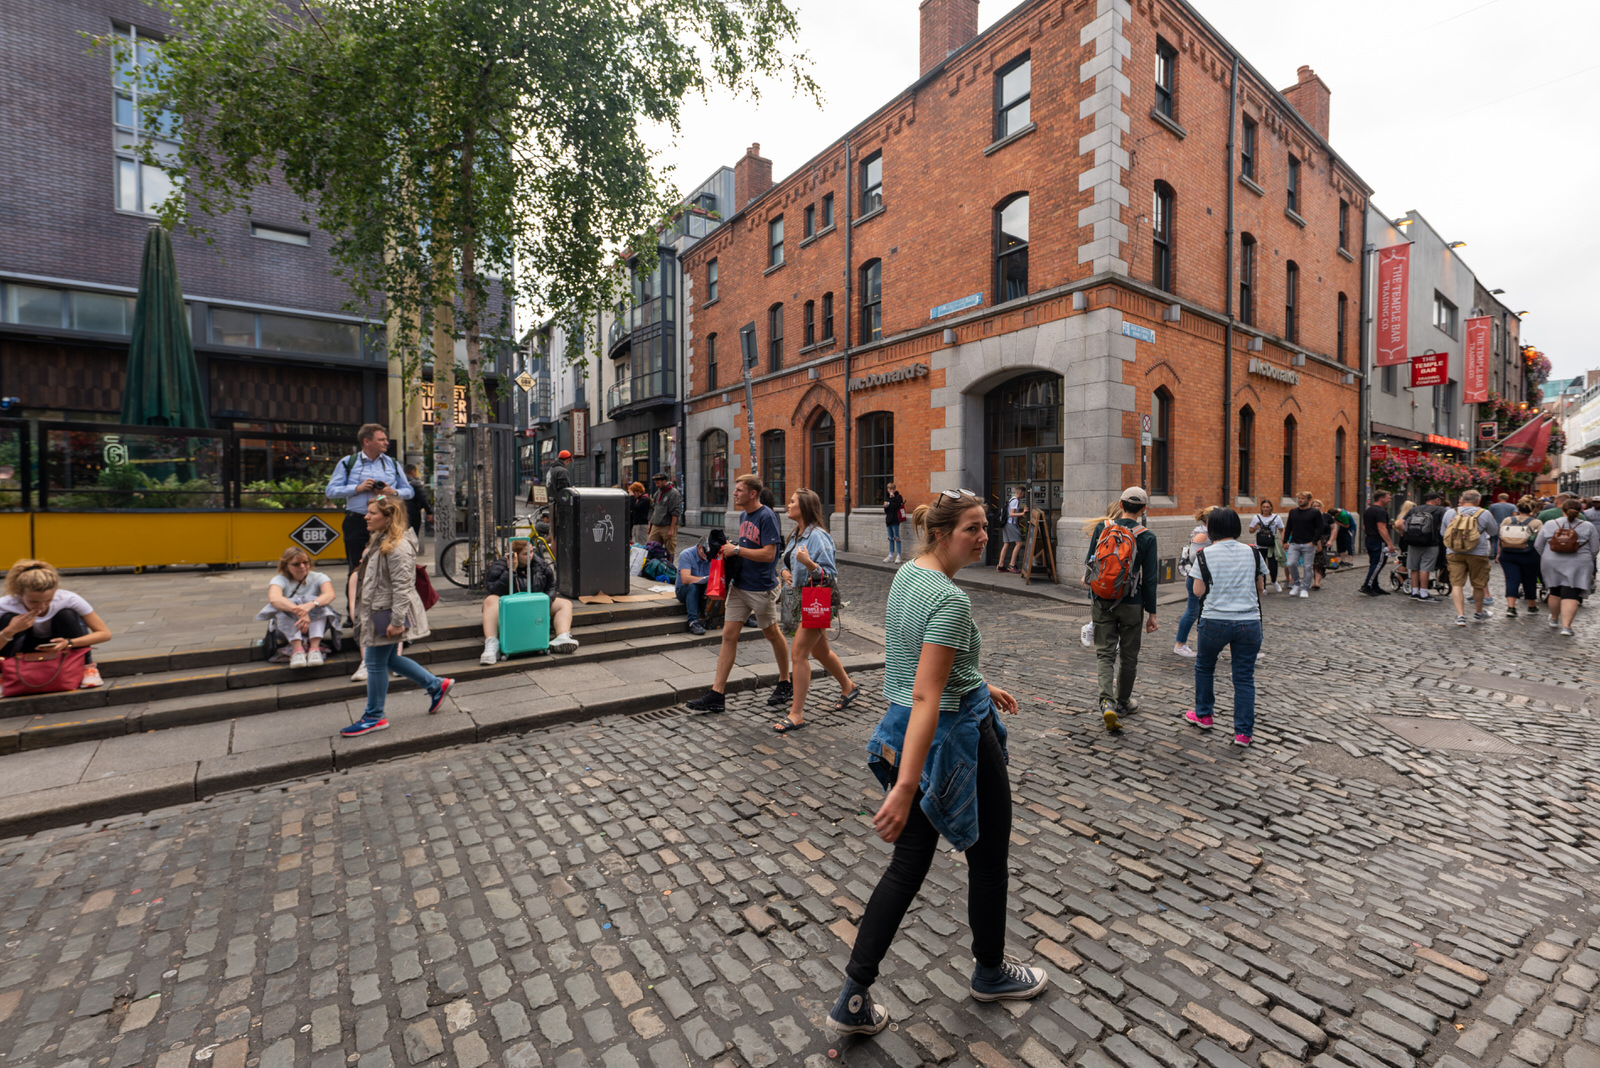 TEMPLE BAR - WHERE TO PARTY 007